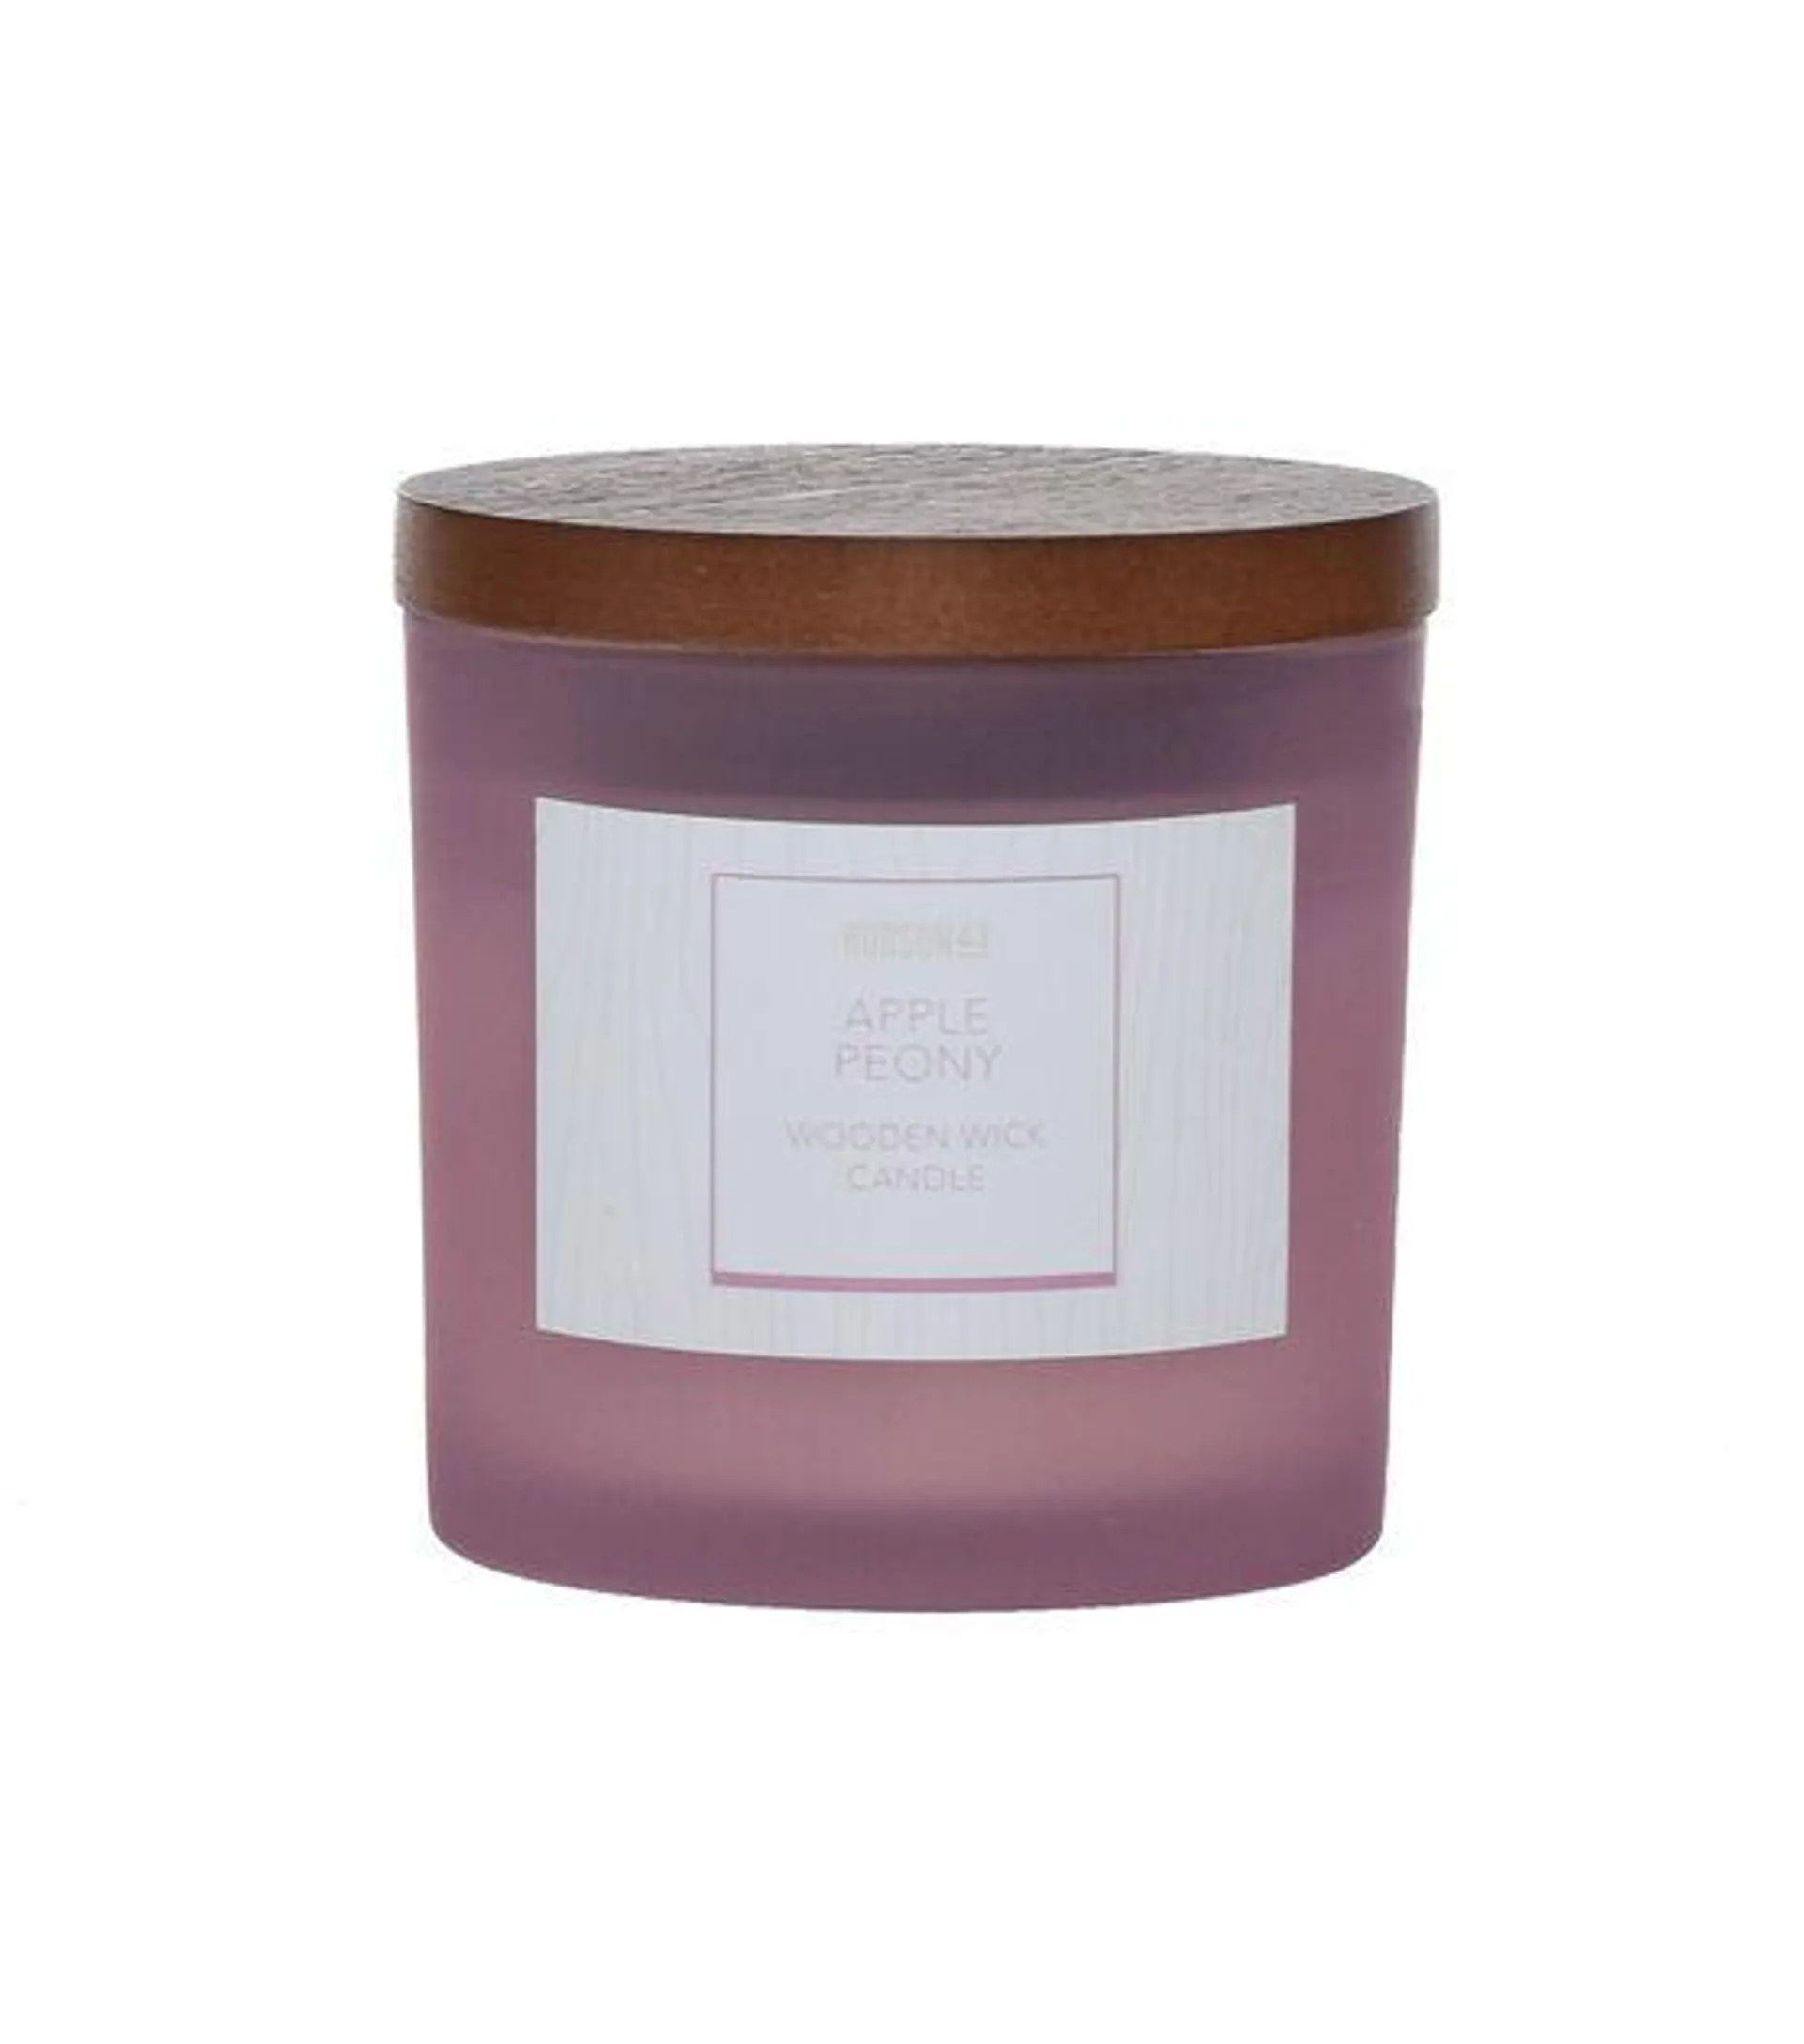 Hudson 43 Wooden Wick Frosted Candle 5oz Apple Peony Pink